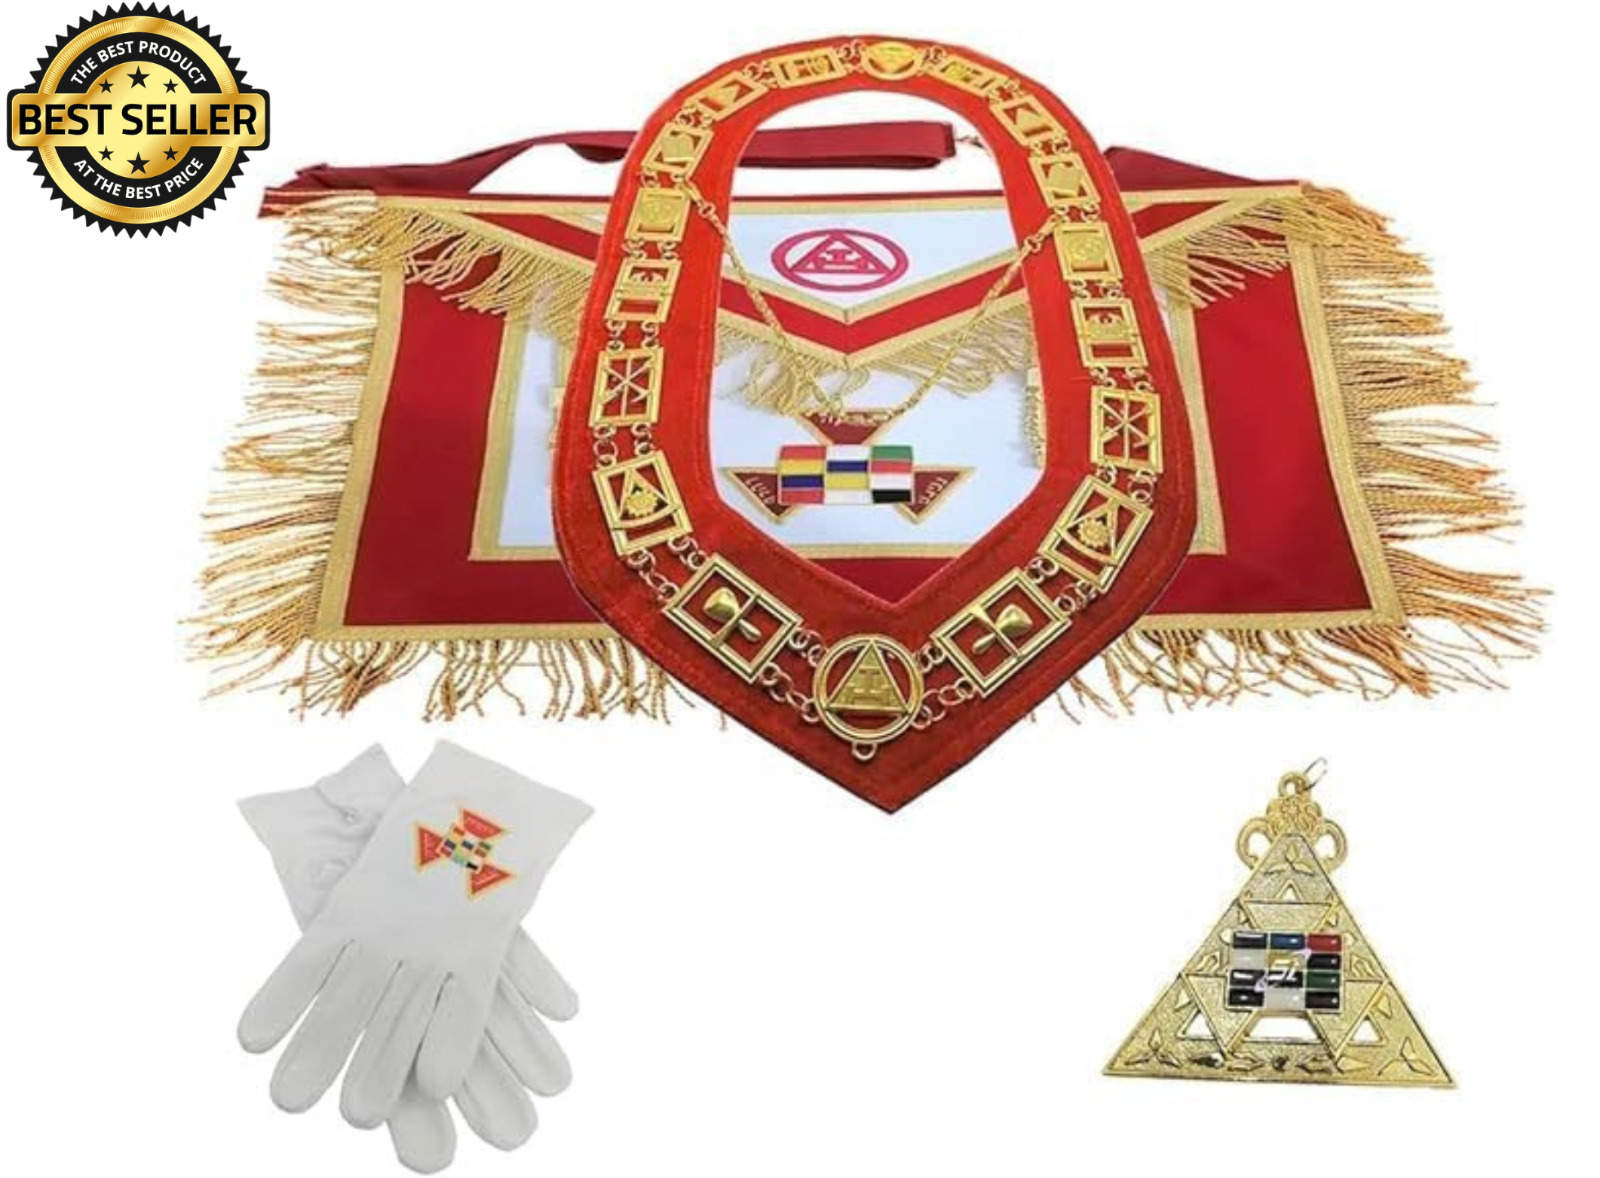 Masonic Royal Arch Full dressed set Apron, chain collar, gloves and jewel